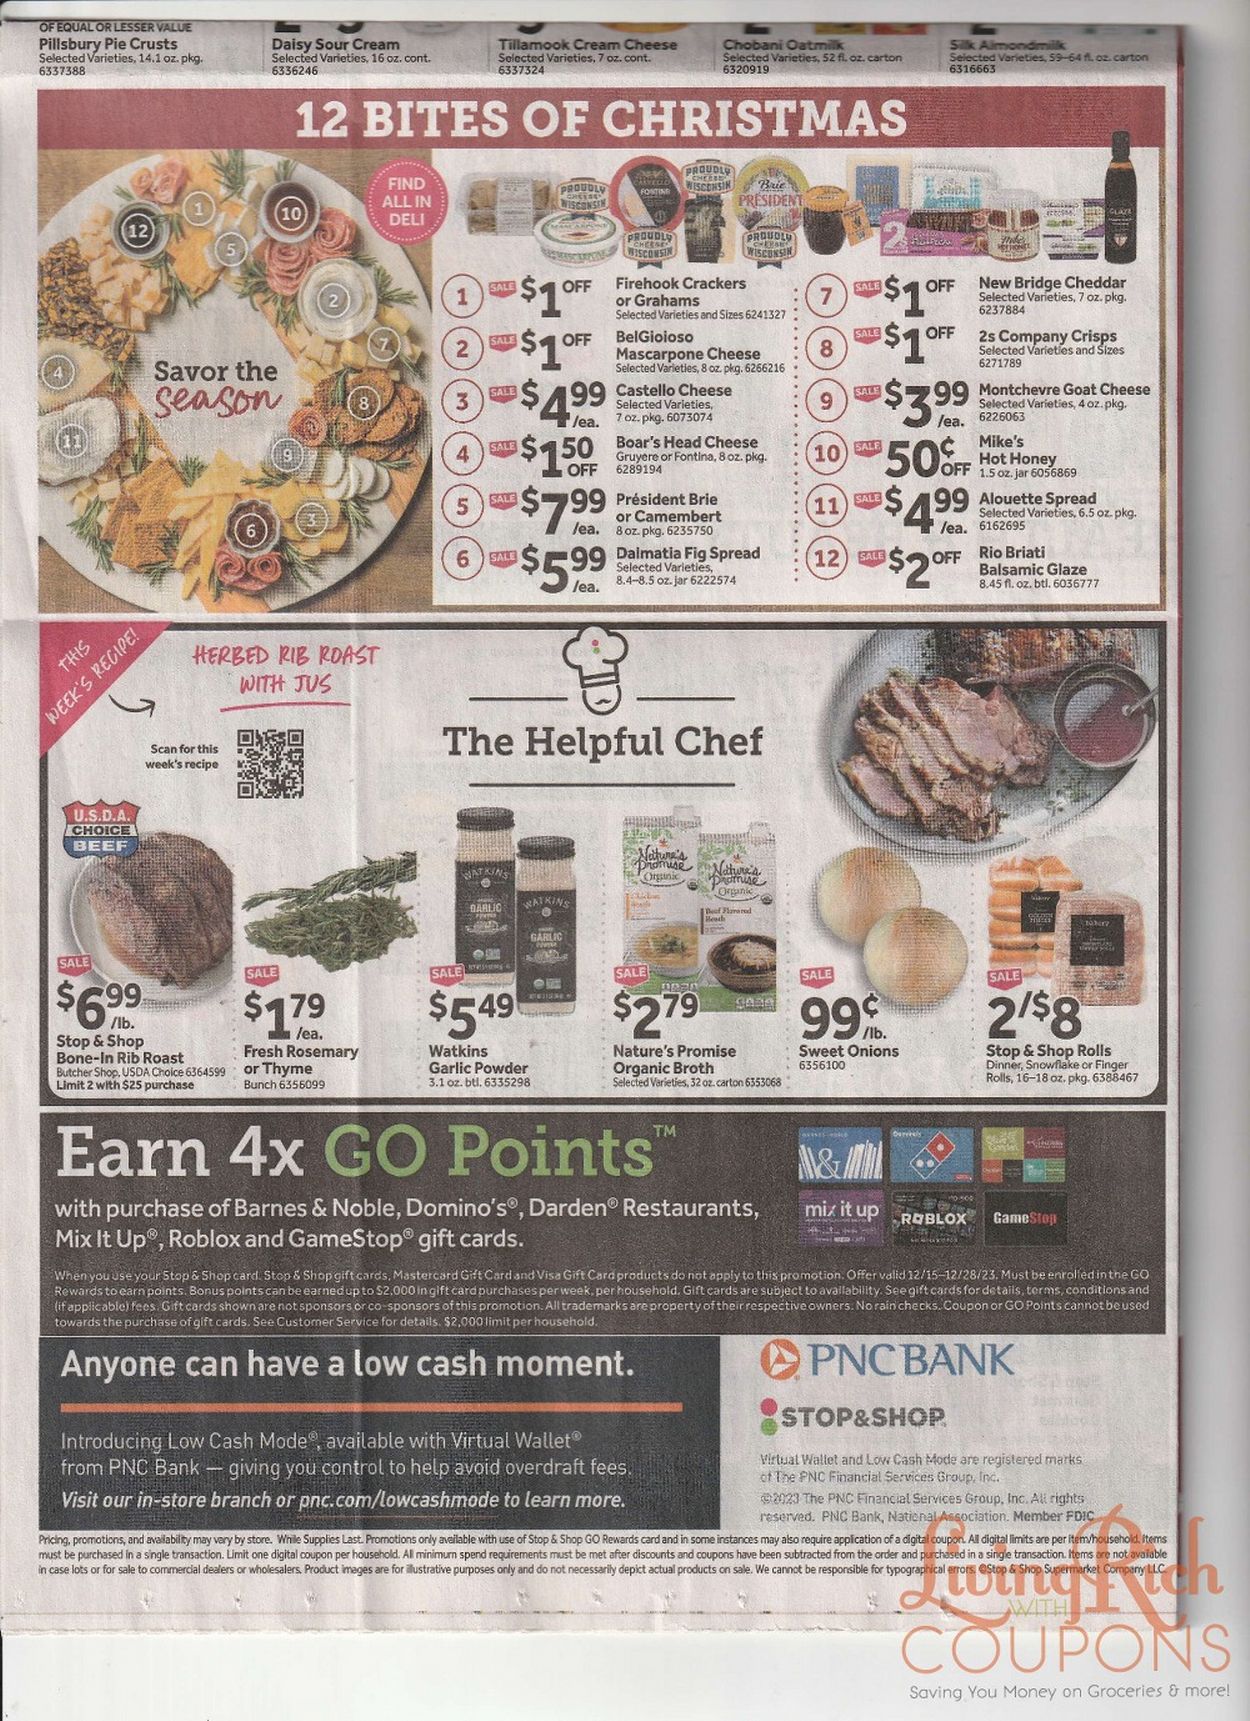 Stop and Shop July 2024 Weekly Sales, Deals, Discounts and Digital Coupons.